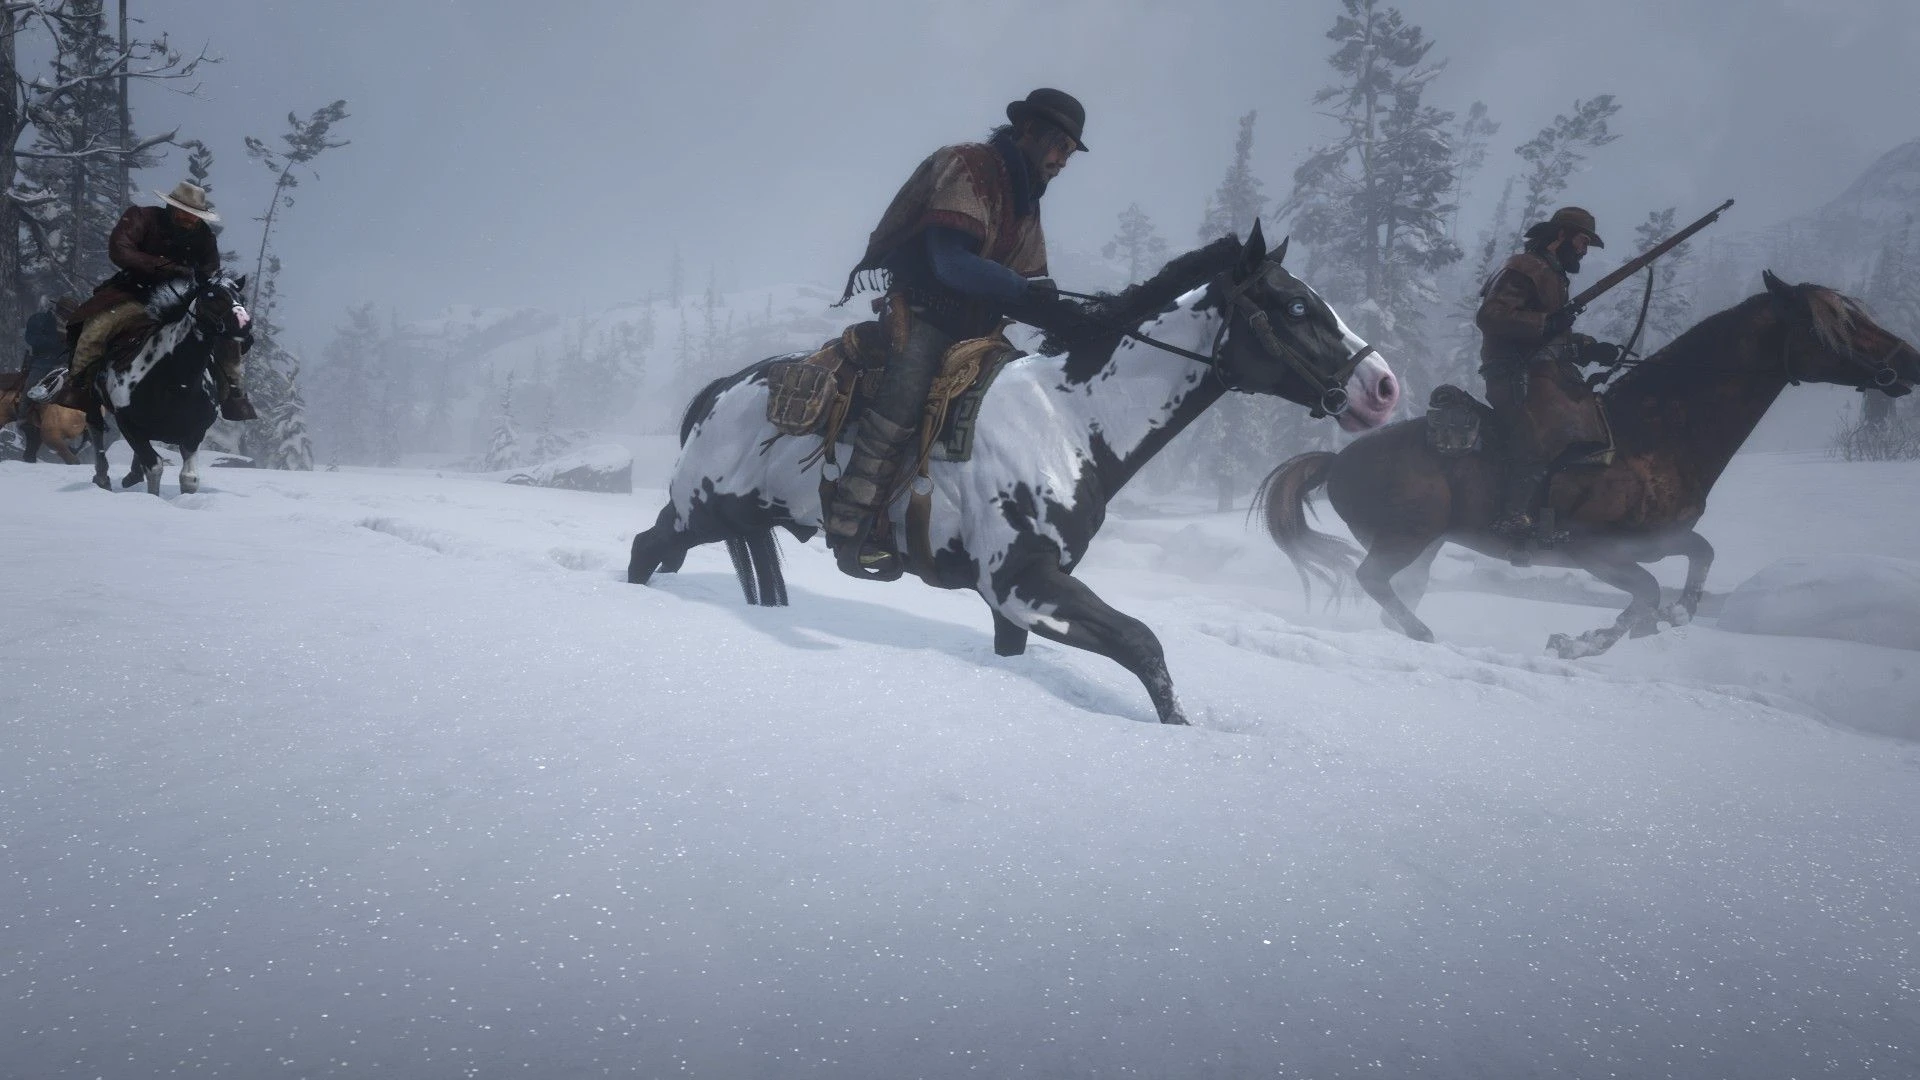 Gang horses remade at Red Dead Redemption 2 Nexus - Mods and community